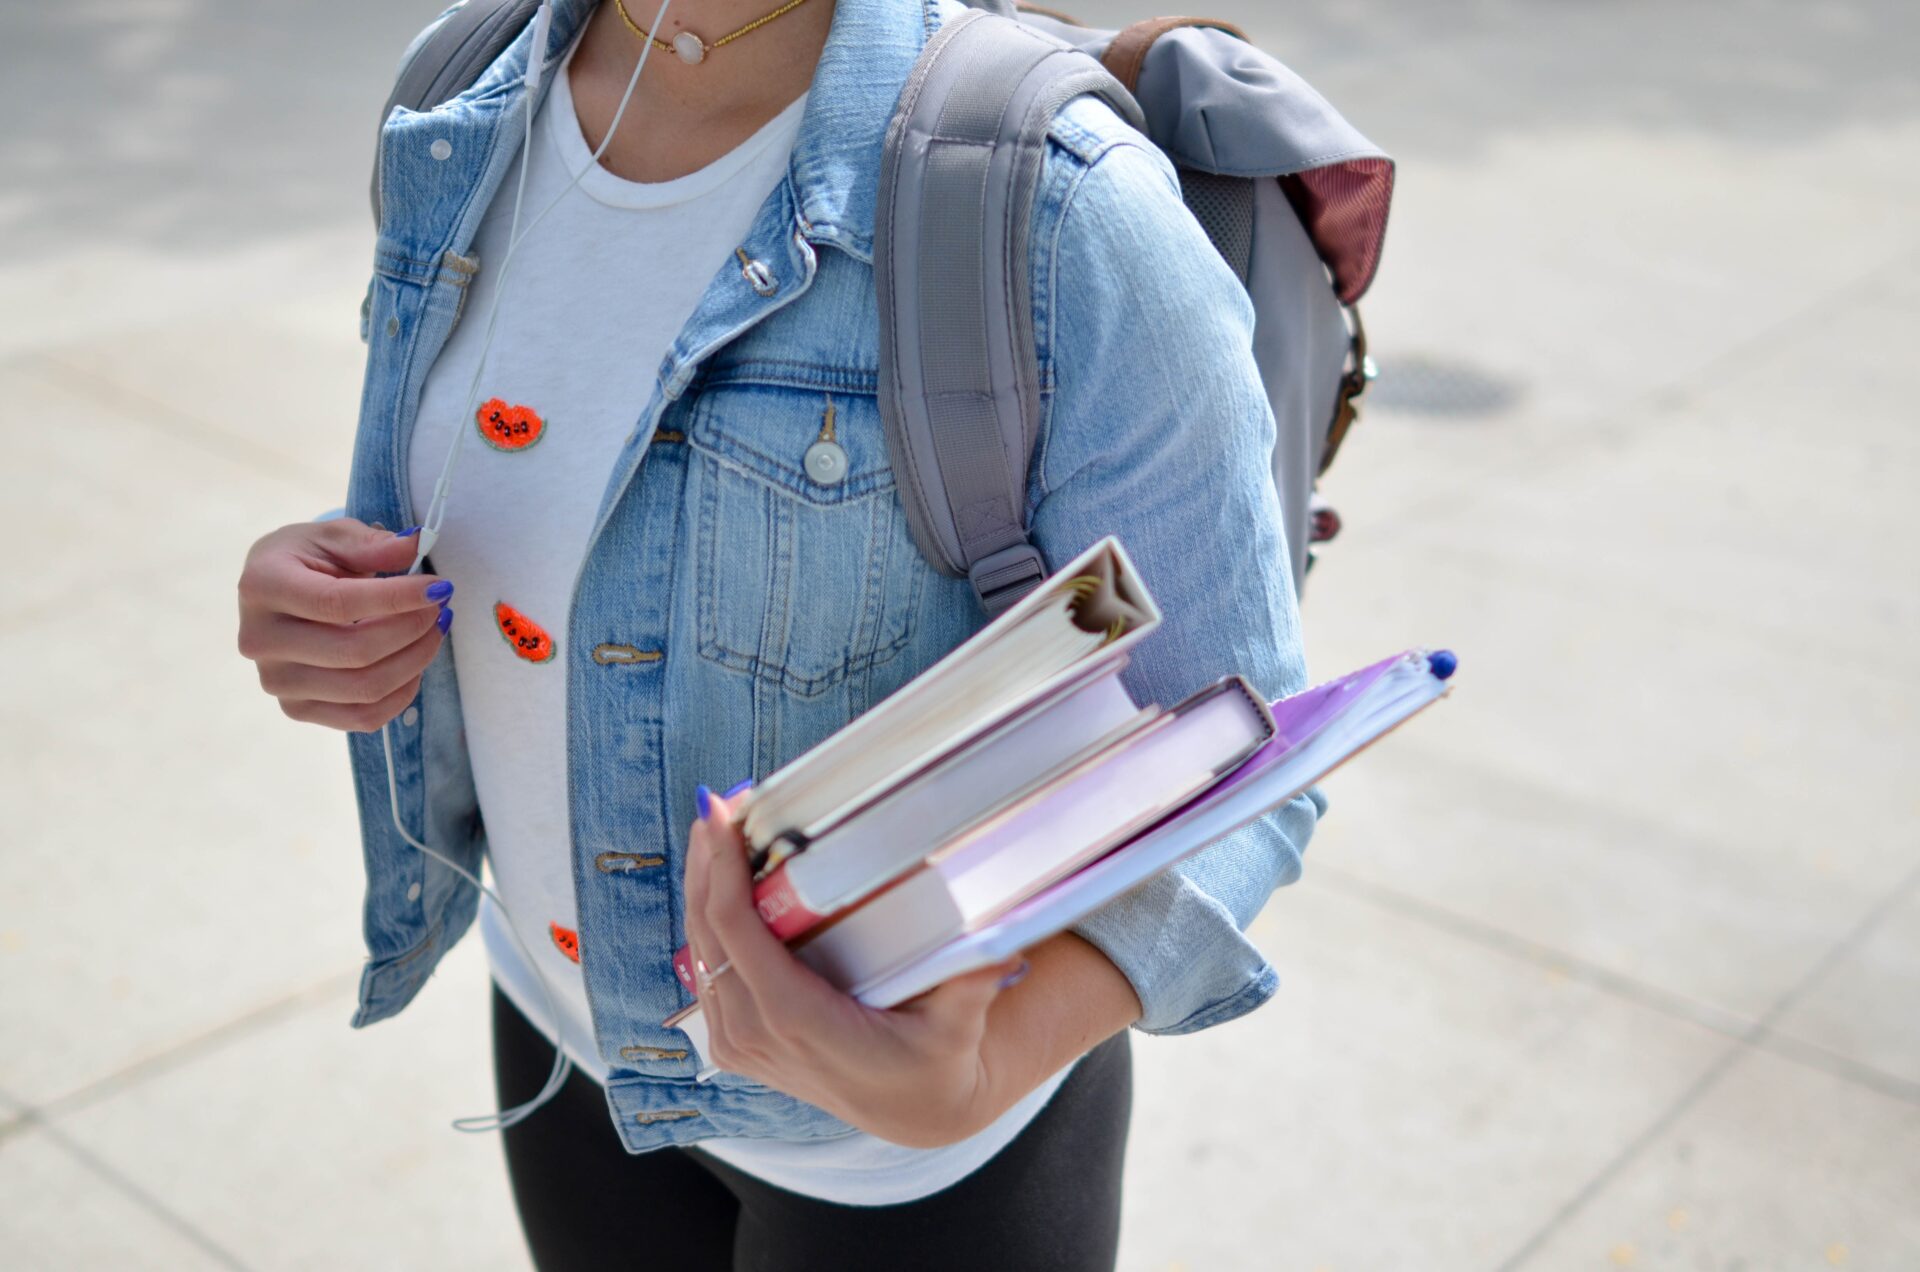 A student carrying a backpack and holding books